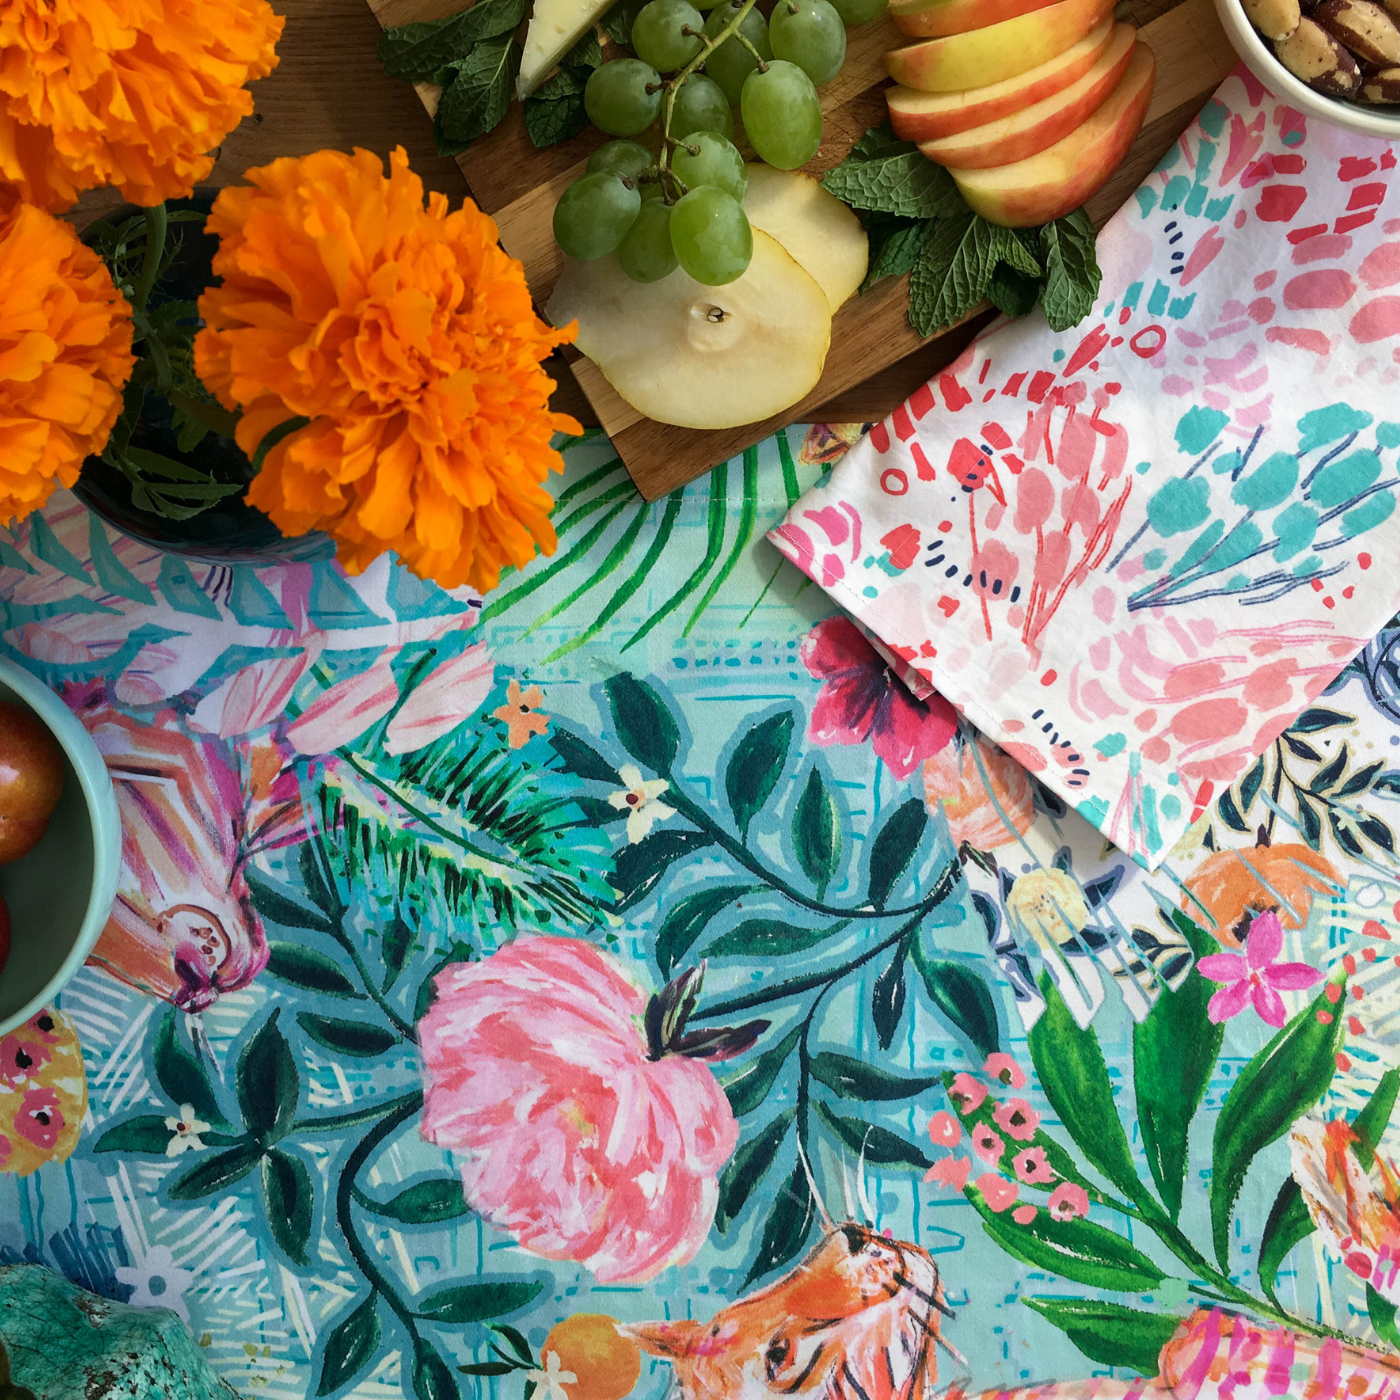 A cloth napkin with a white background and pink, red and turquoise brushstroke flowers sits next to a vase of small orange flowers and the edge of a wooden cutting board with mint leaves, apple slices, grapes and a small white ceramic bowl of Brazil nuts. On the table is a tablecloth with a turquoise background and a design featuring large orange tigers surrounded by large pink blooms, small oranges and sprigs of green leaves.